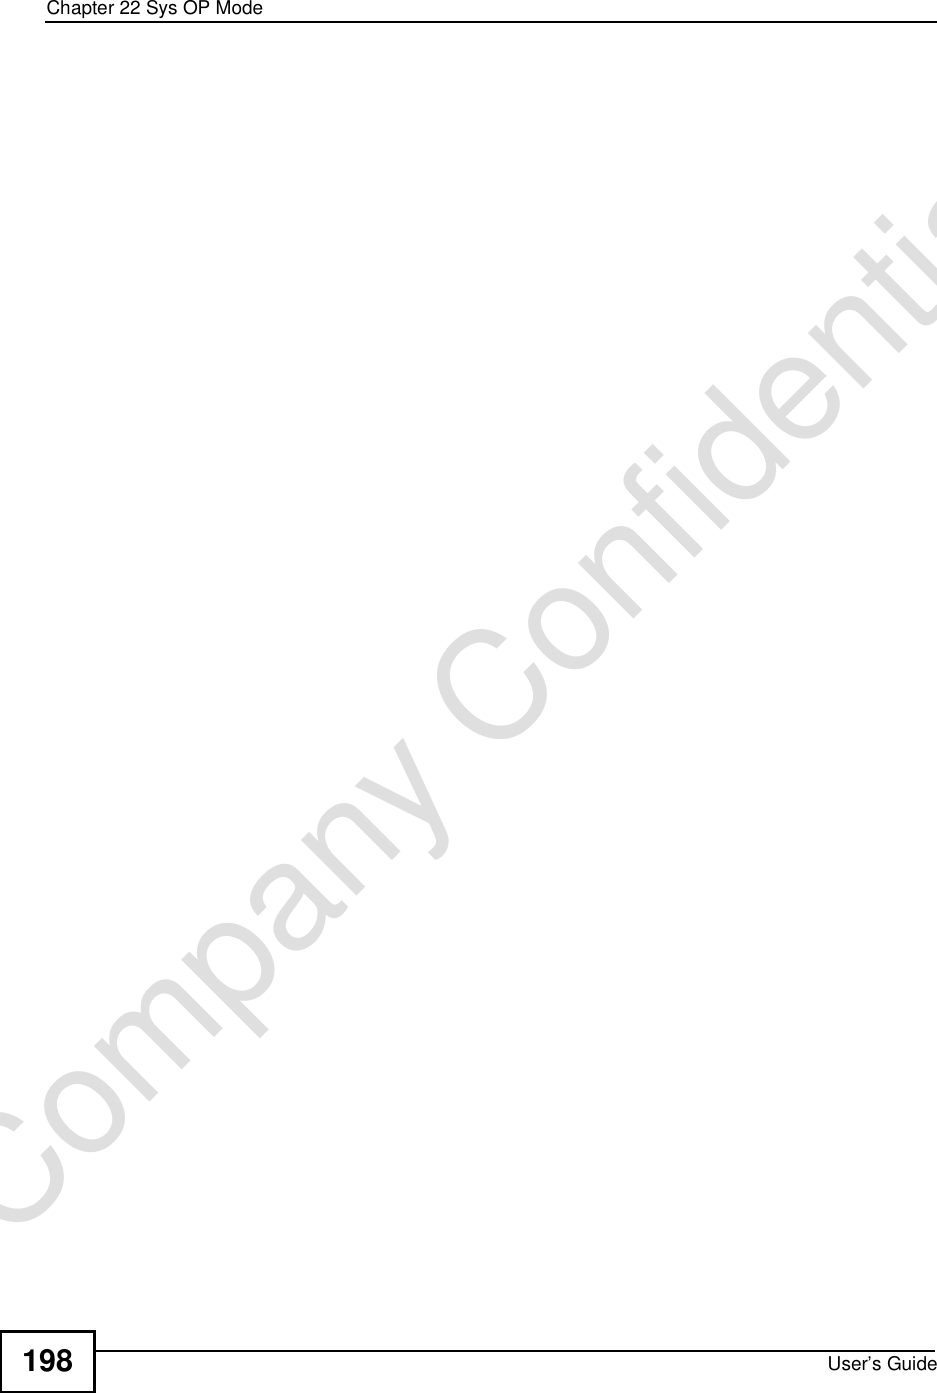 Chapter 22Sys OP ModeUser’s Guide198Company Confidential